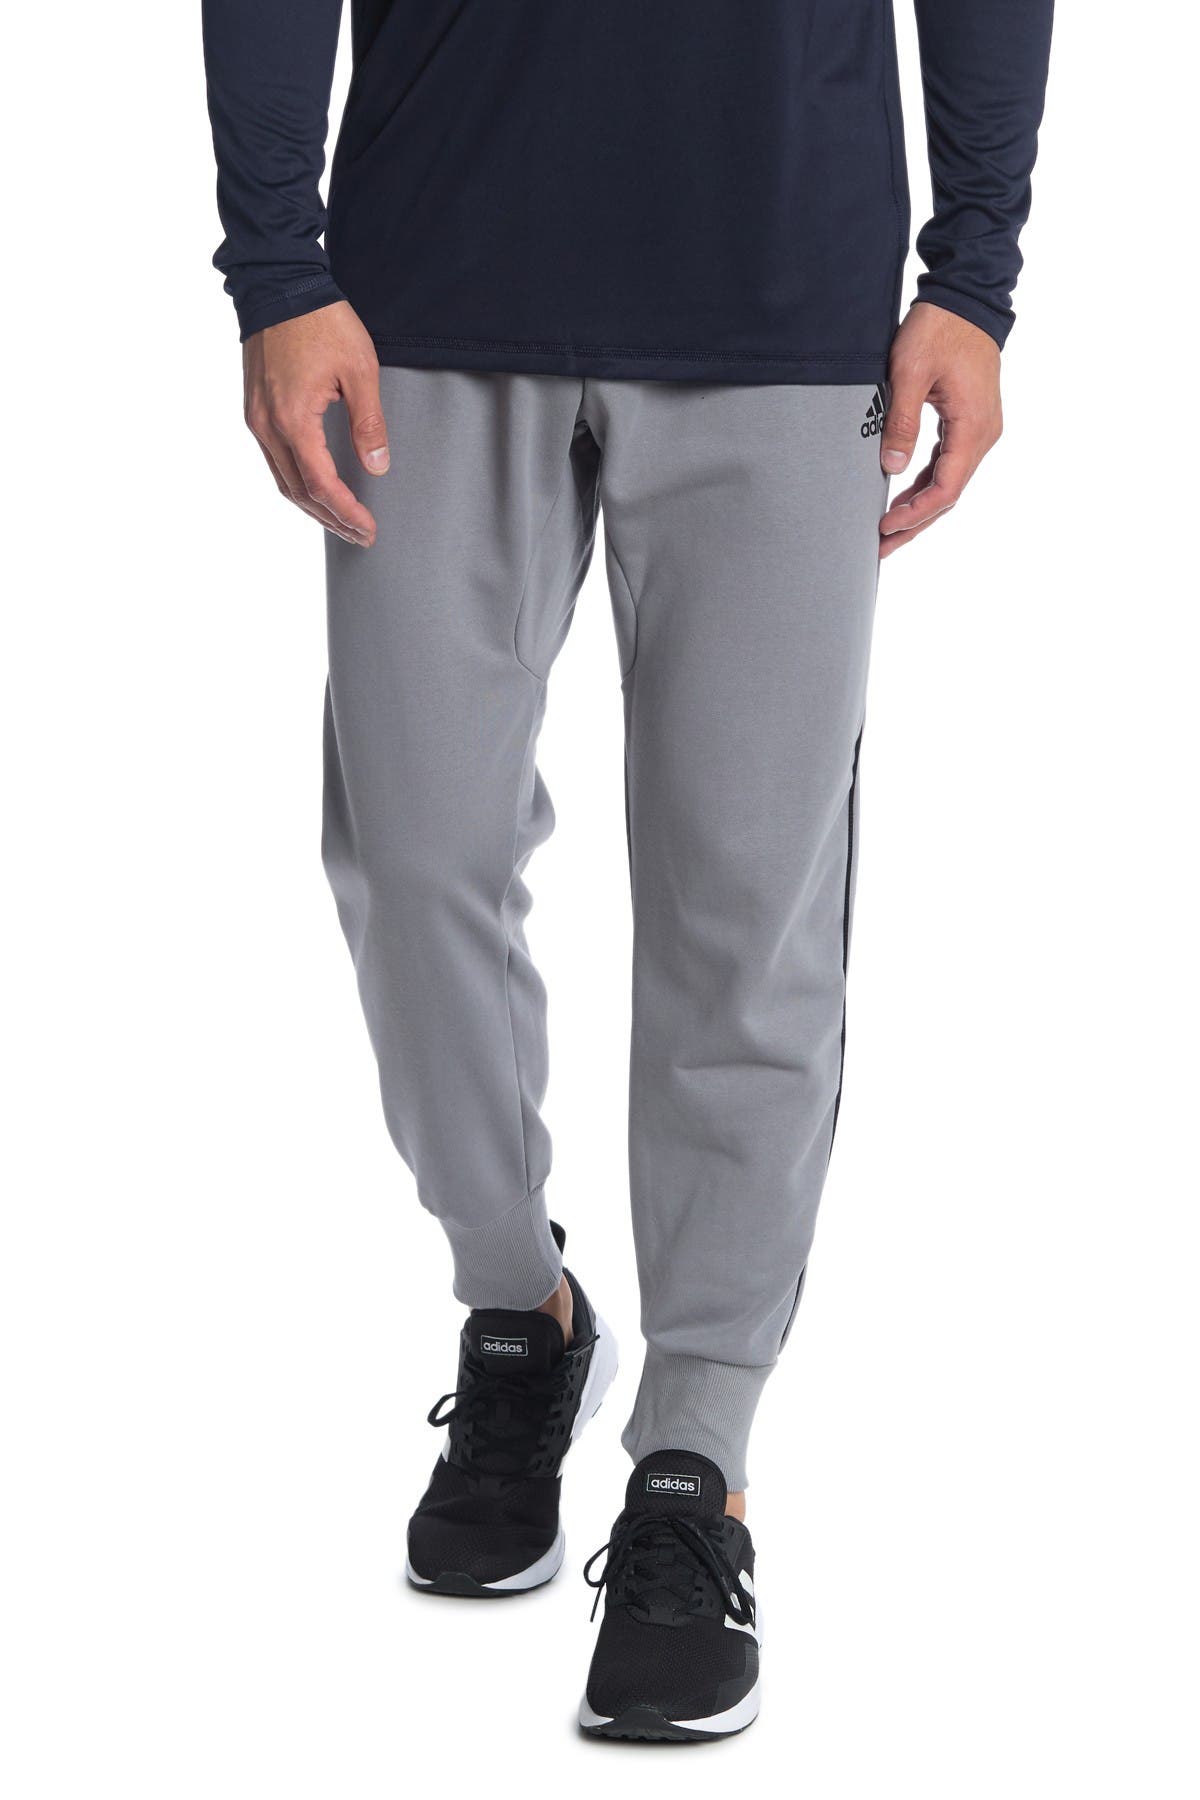 sport french terry pants adidas